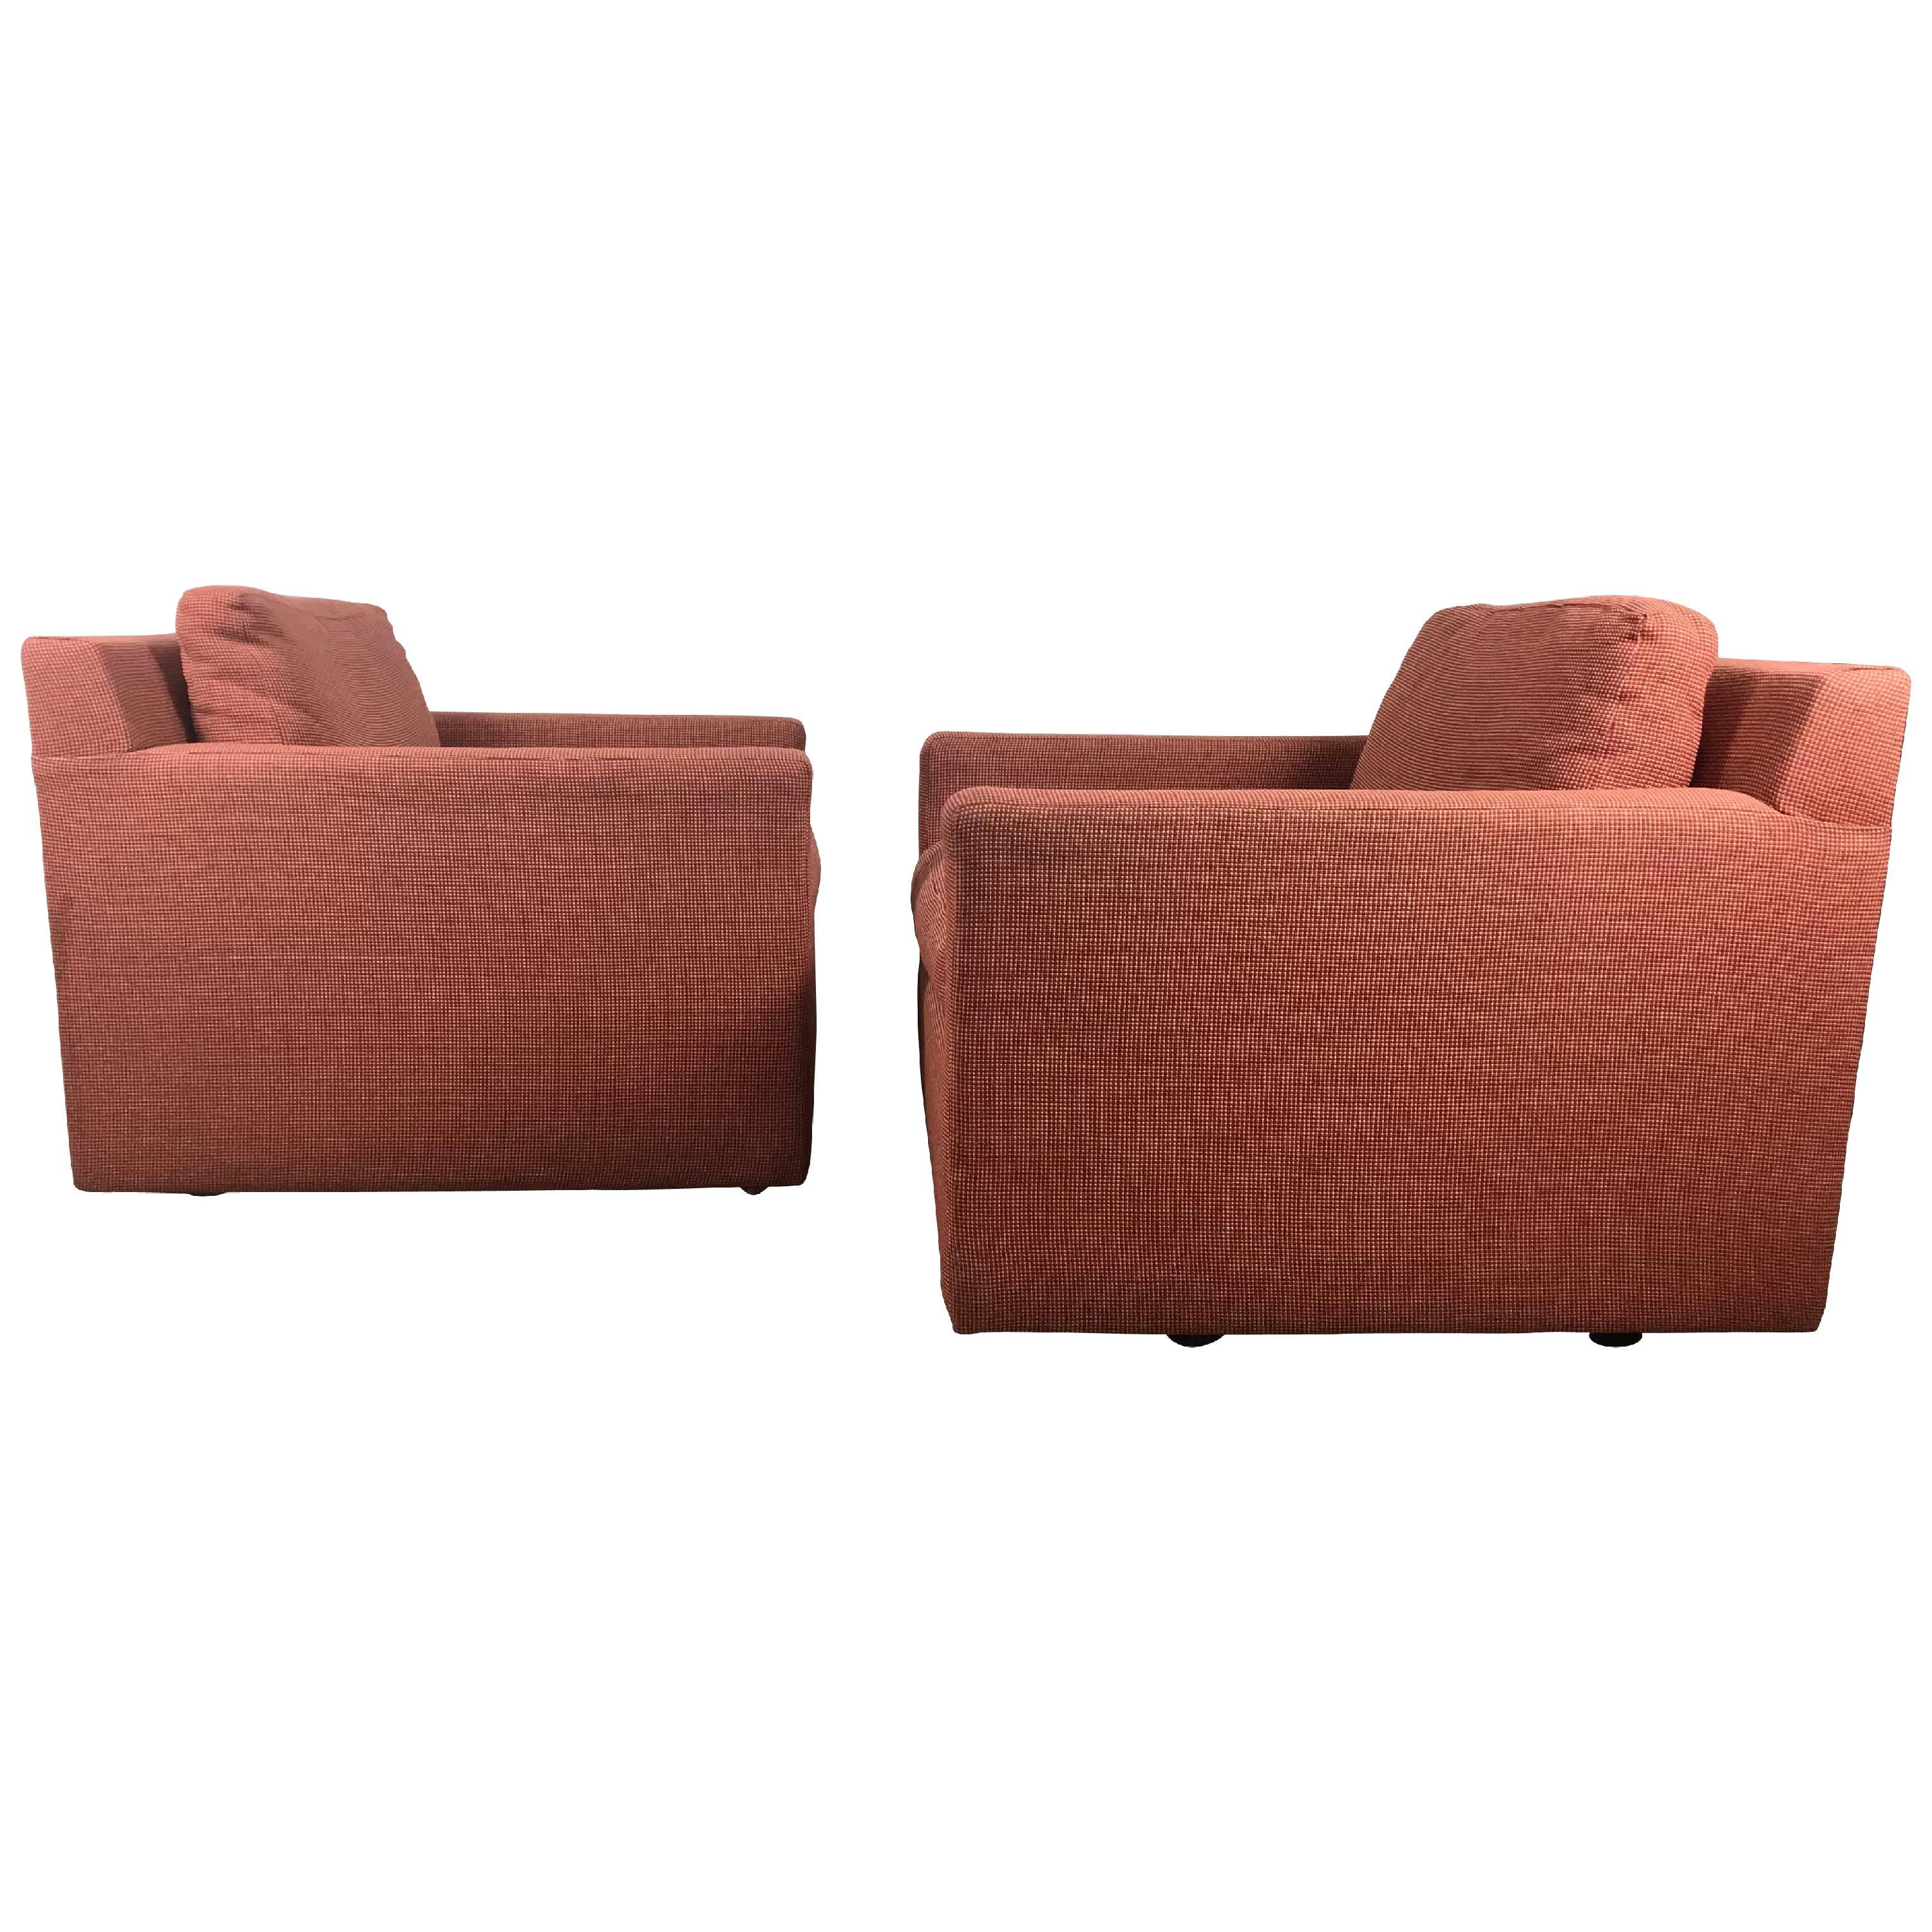 Stunning Pair of Cube Lounge Chairs Attributed to Milo Baughman For Sale